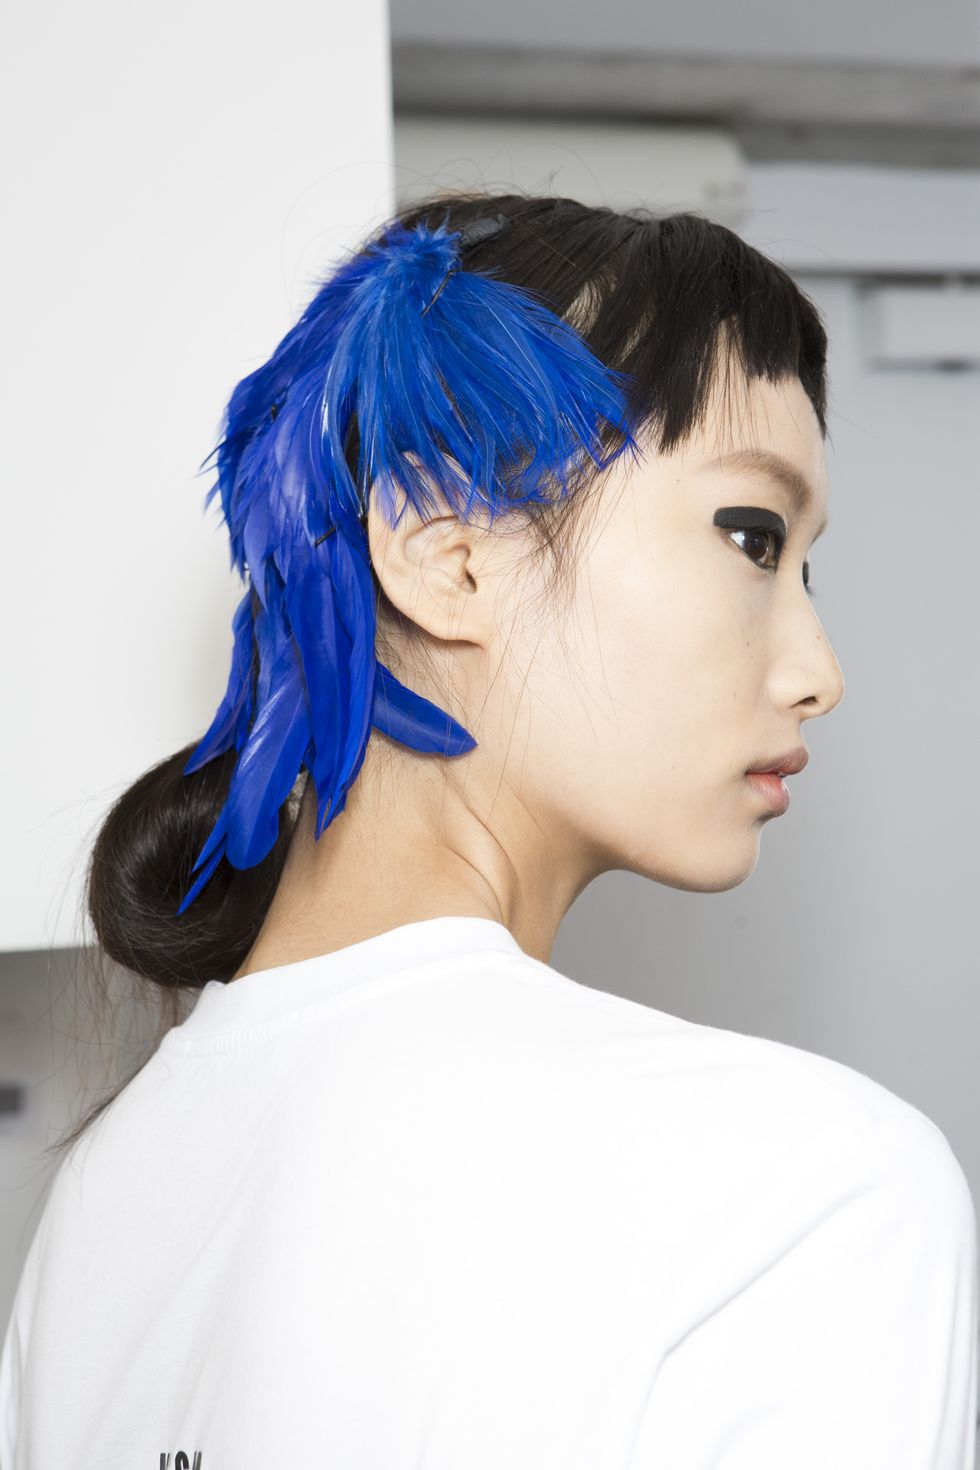 Hair, Blue, Face, Hairstyle, Chin, Hair coloring, Beauty, Shoulder, Fashion, Electric blue, 